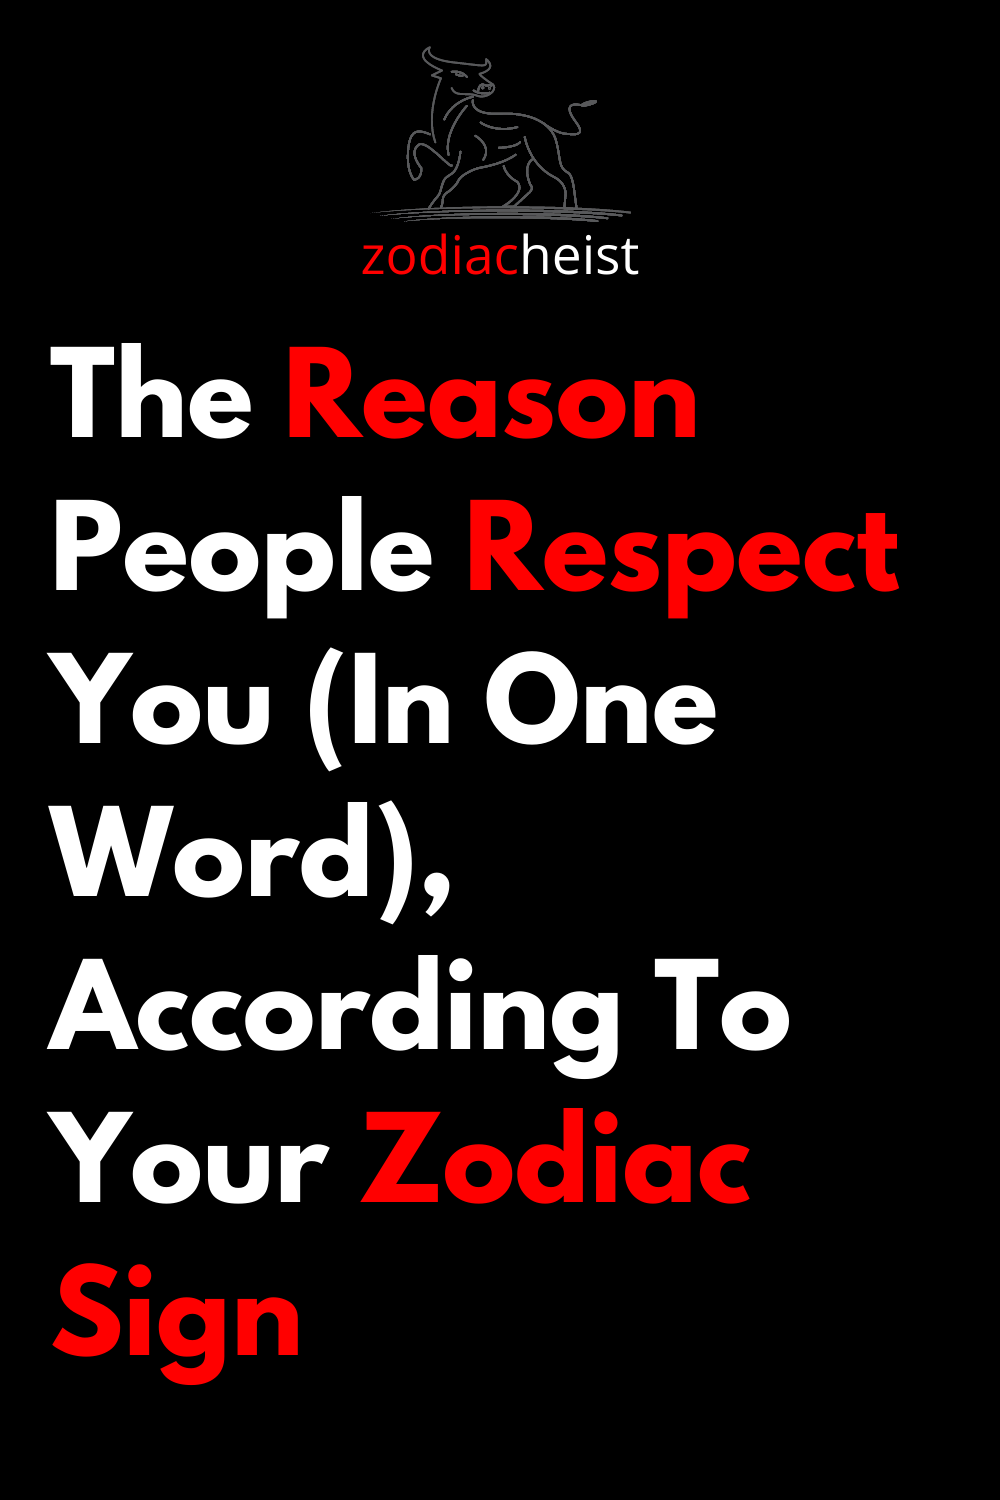 The Reason People Respect You (In One Word), According To Your Zodiac Sign